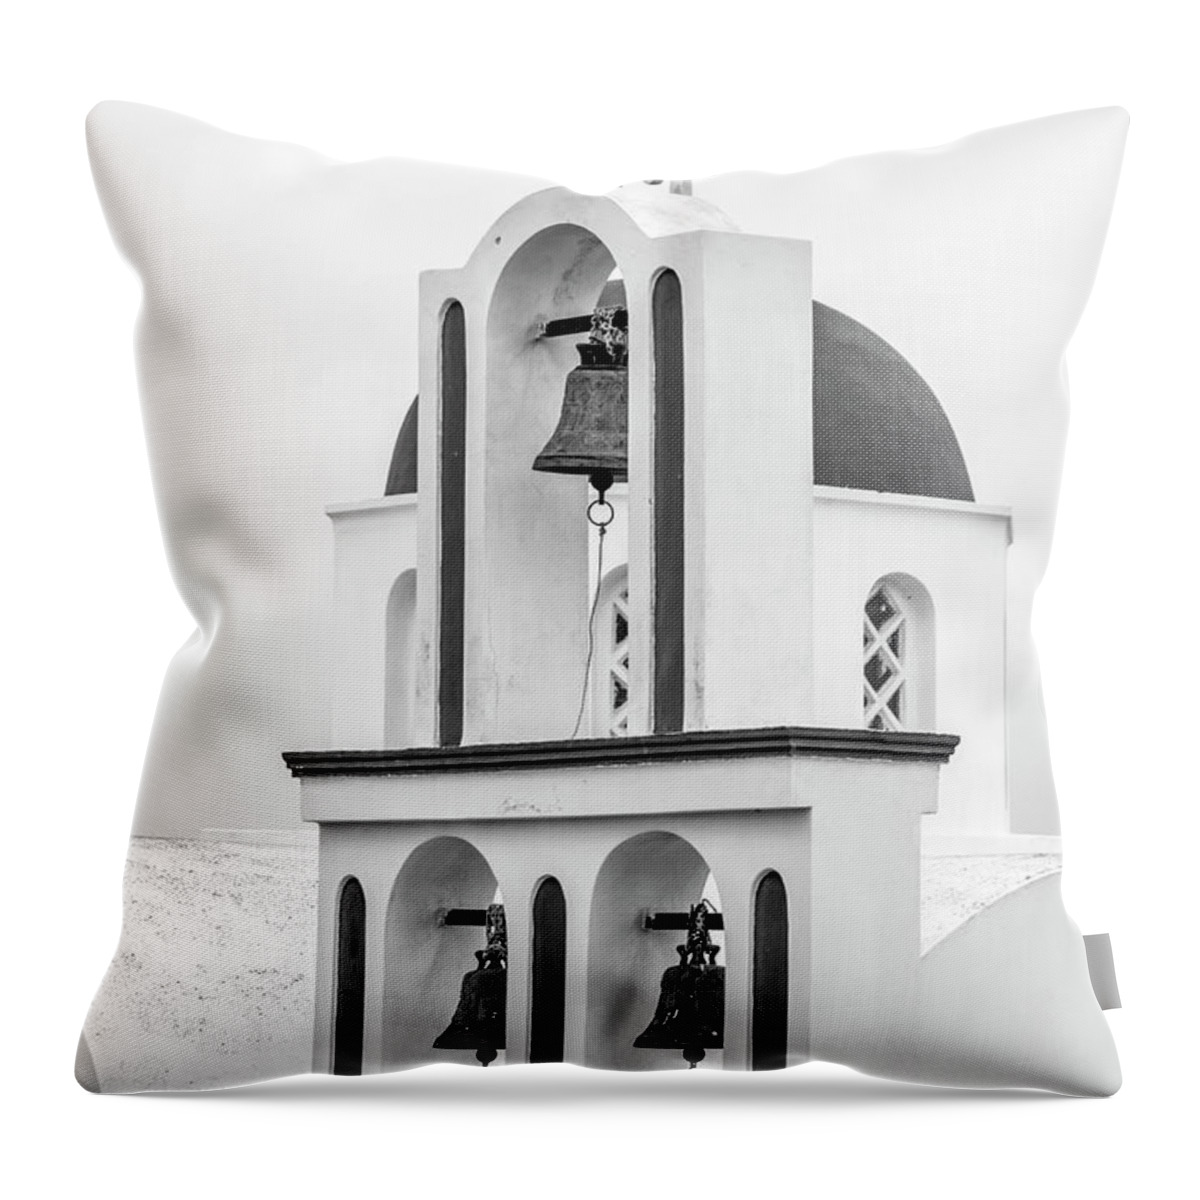  Greece Throw Pillow featuring the photograph For whom the bell tolls - Santorini by Usha Peddamatham